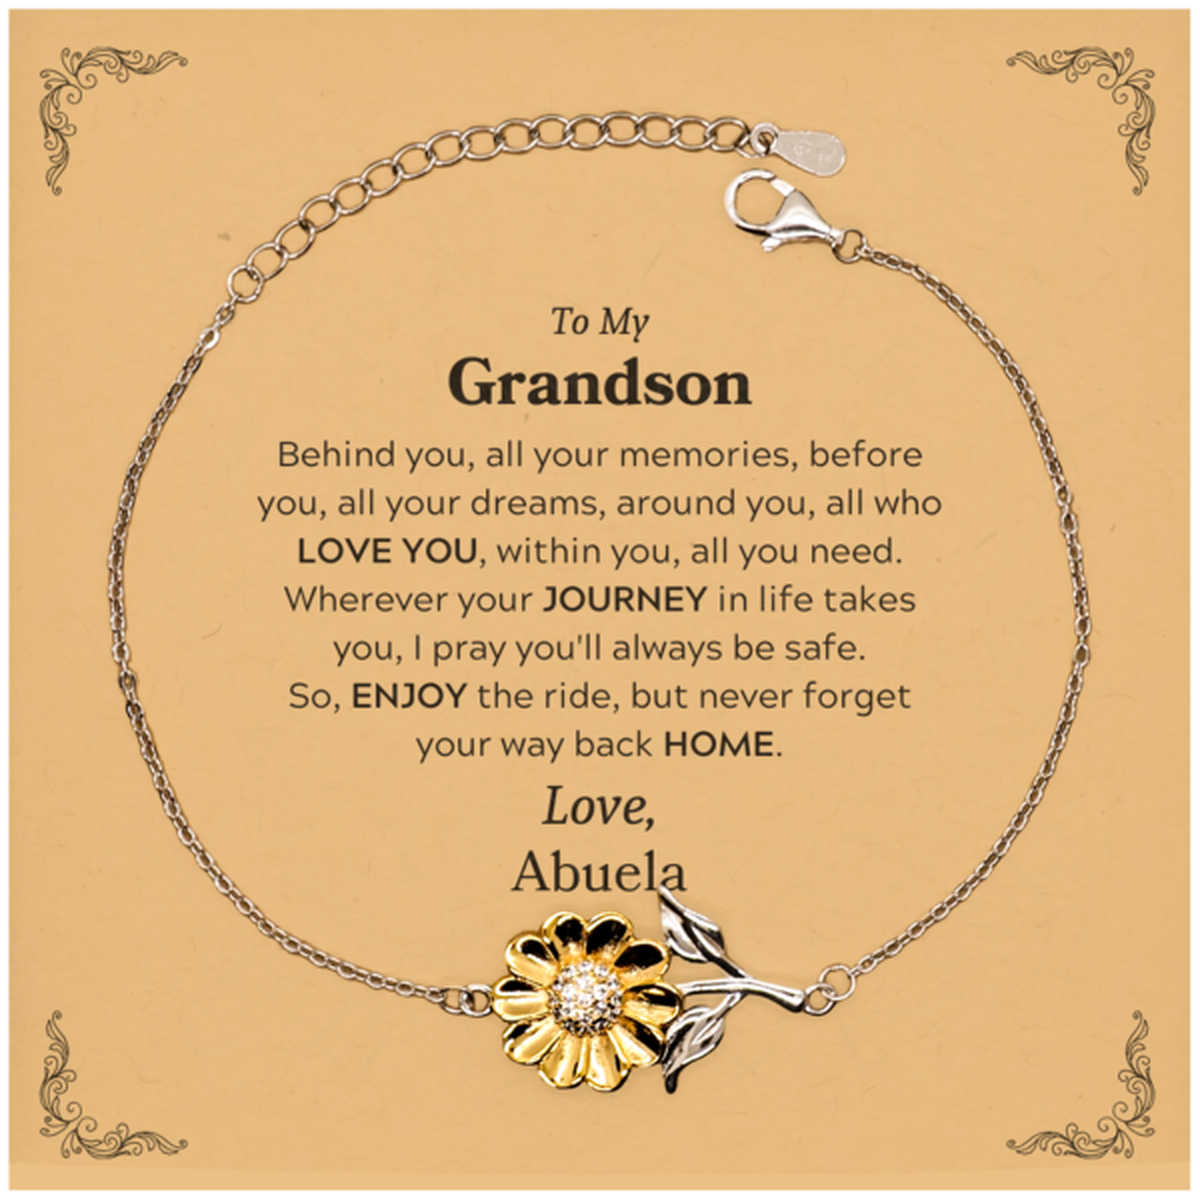 To My Grandson Graduation Gifts from Abuela, Grandson Sunflower Bracelet Christmas Birthday Gifts for Grandson Behind you, all your memories, before you, all your dreams. Love, Abuela